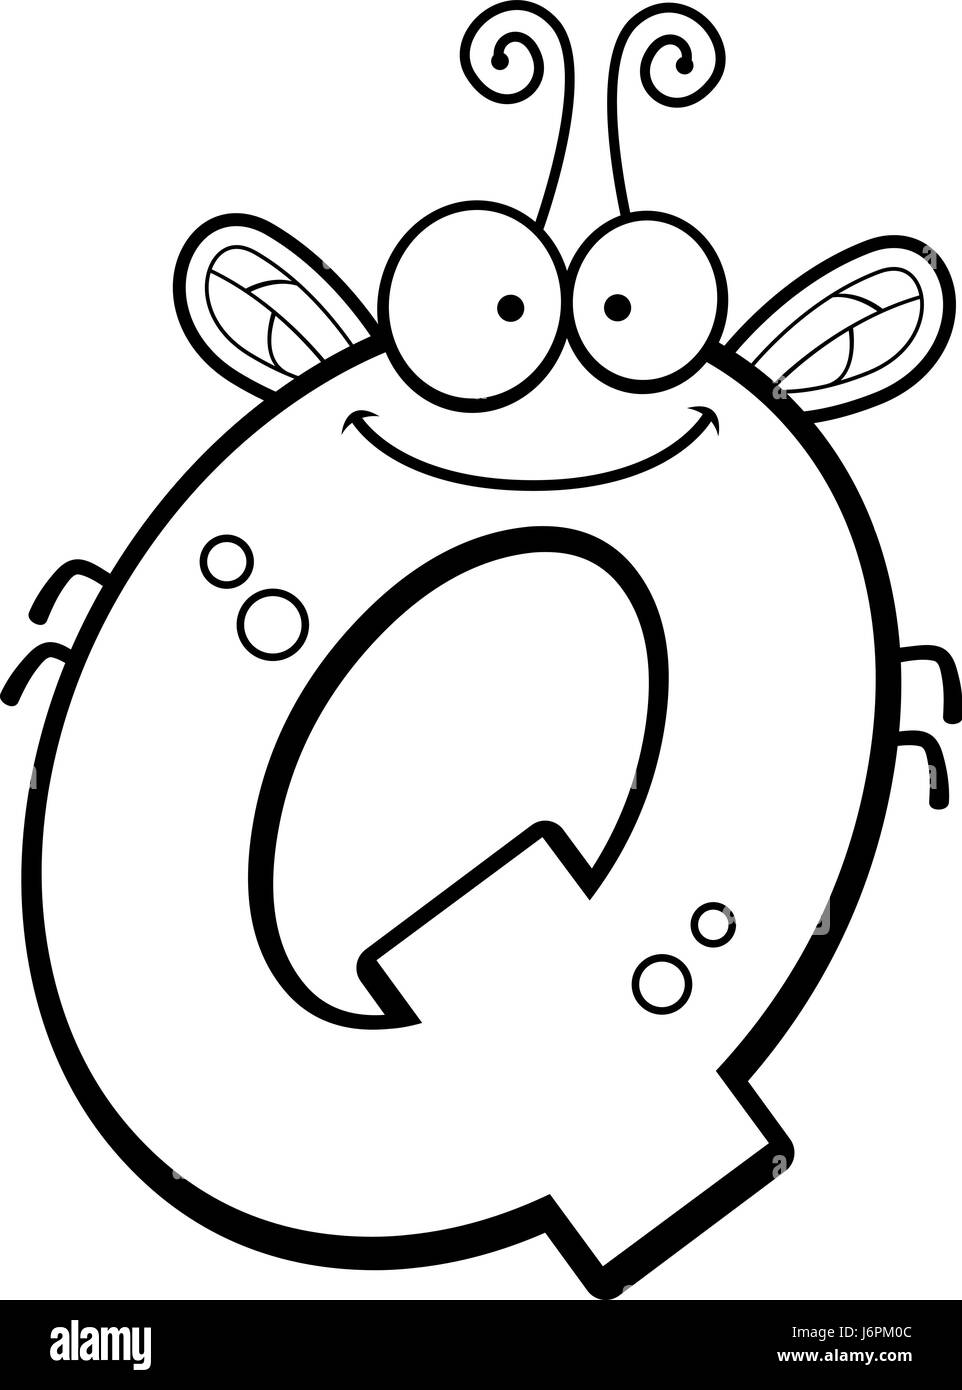 A cartoon illustration of the letter Q with an insect theme Stock ...